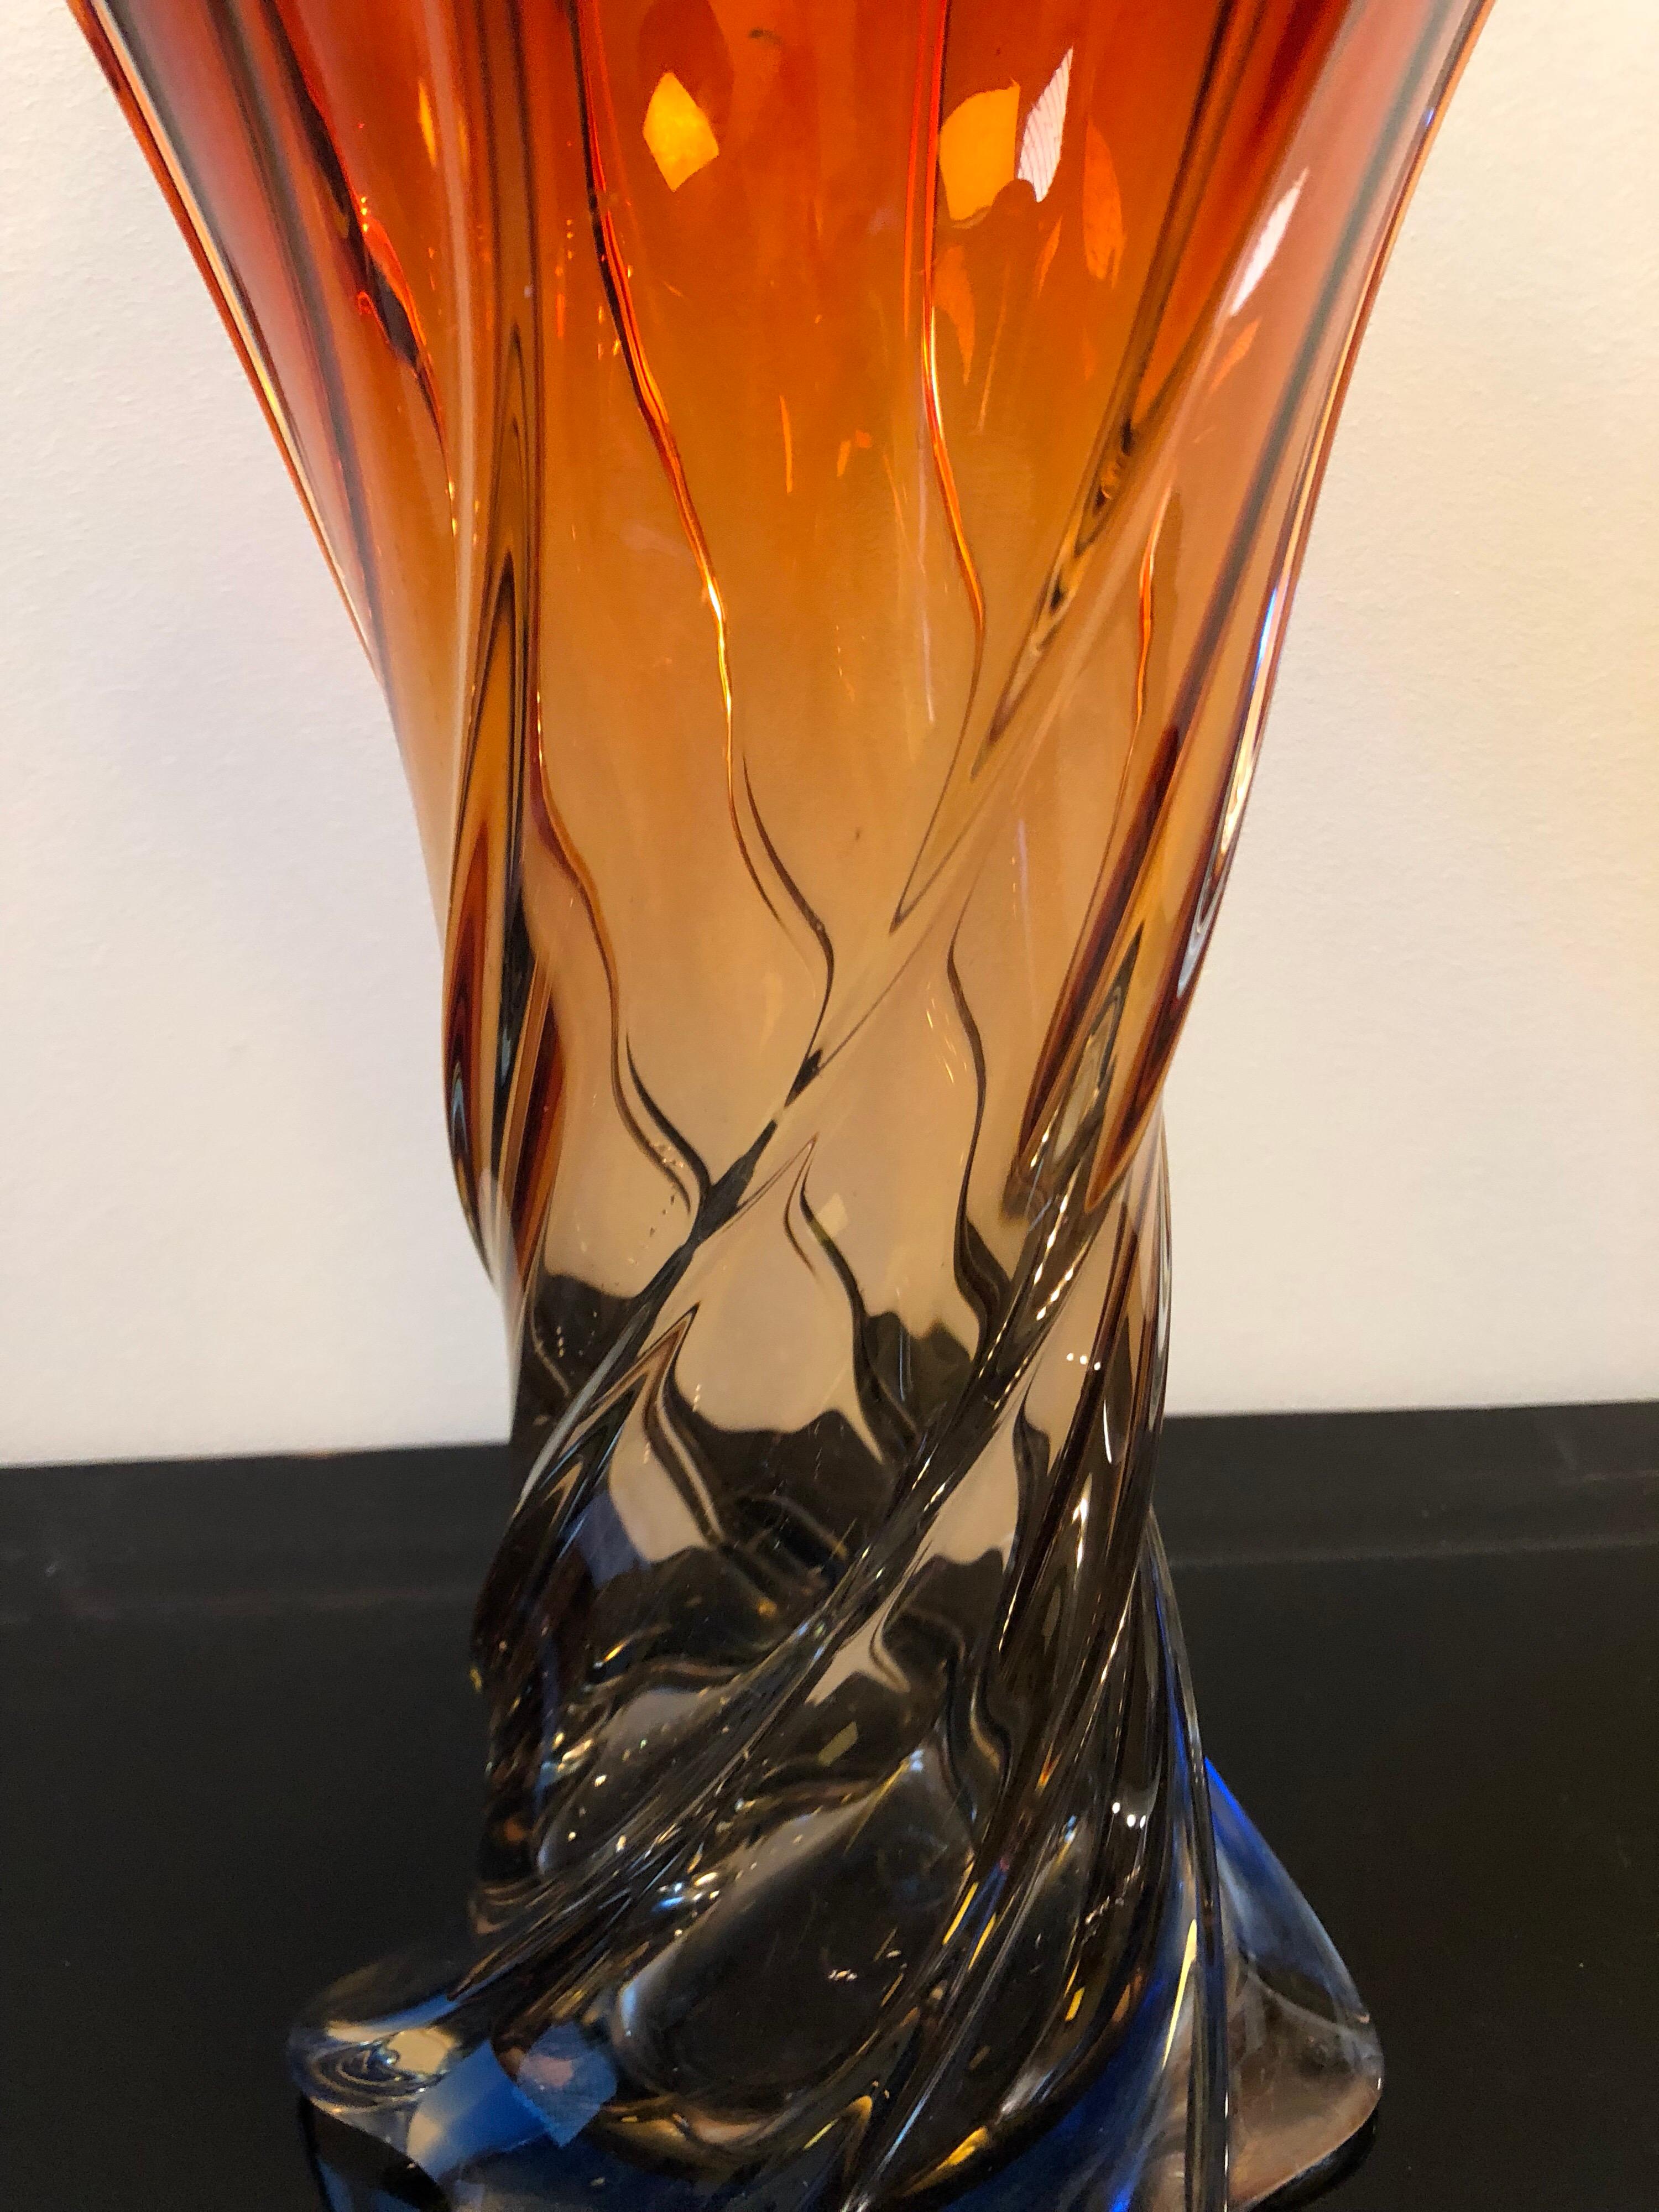 Hand-Crafted Large Sommerso Red and Blue Murano Glass Italian Vase, circa 1970